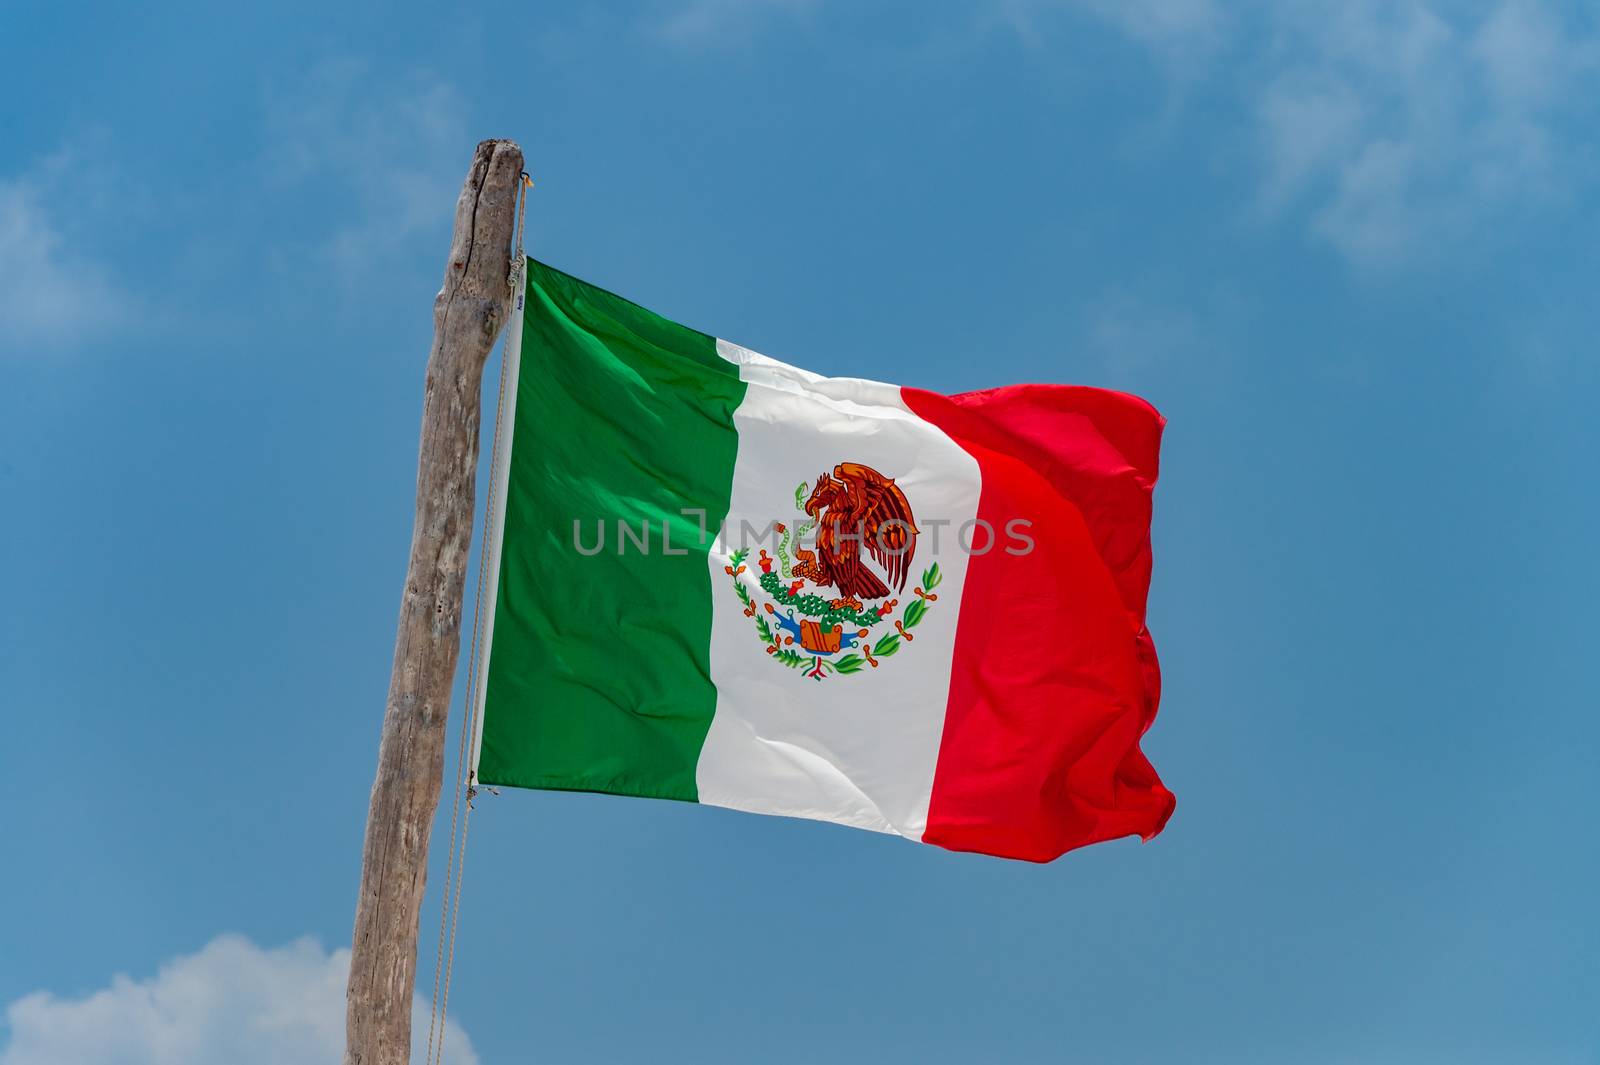 Mexican flag over blue sky in Tulum, Mexico.